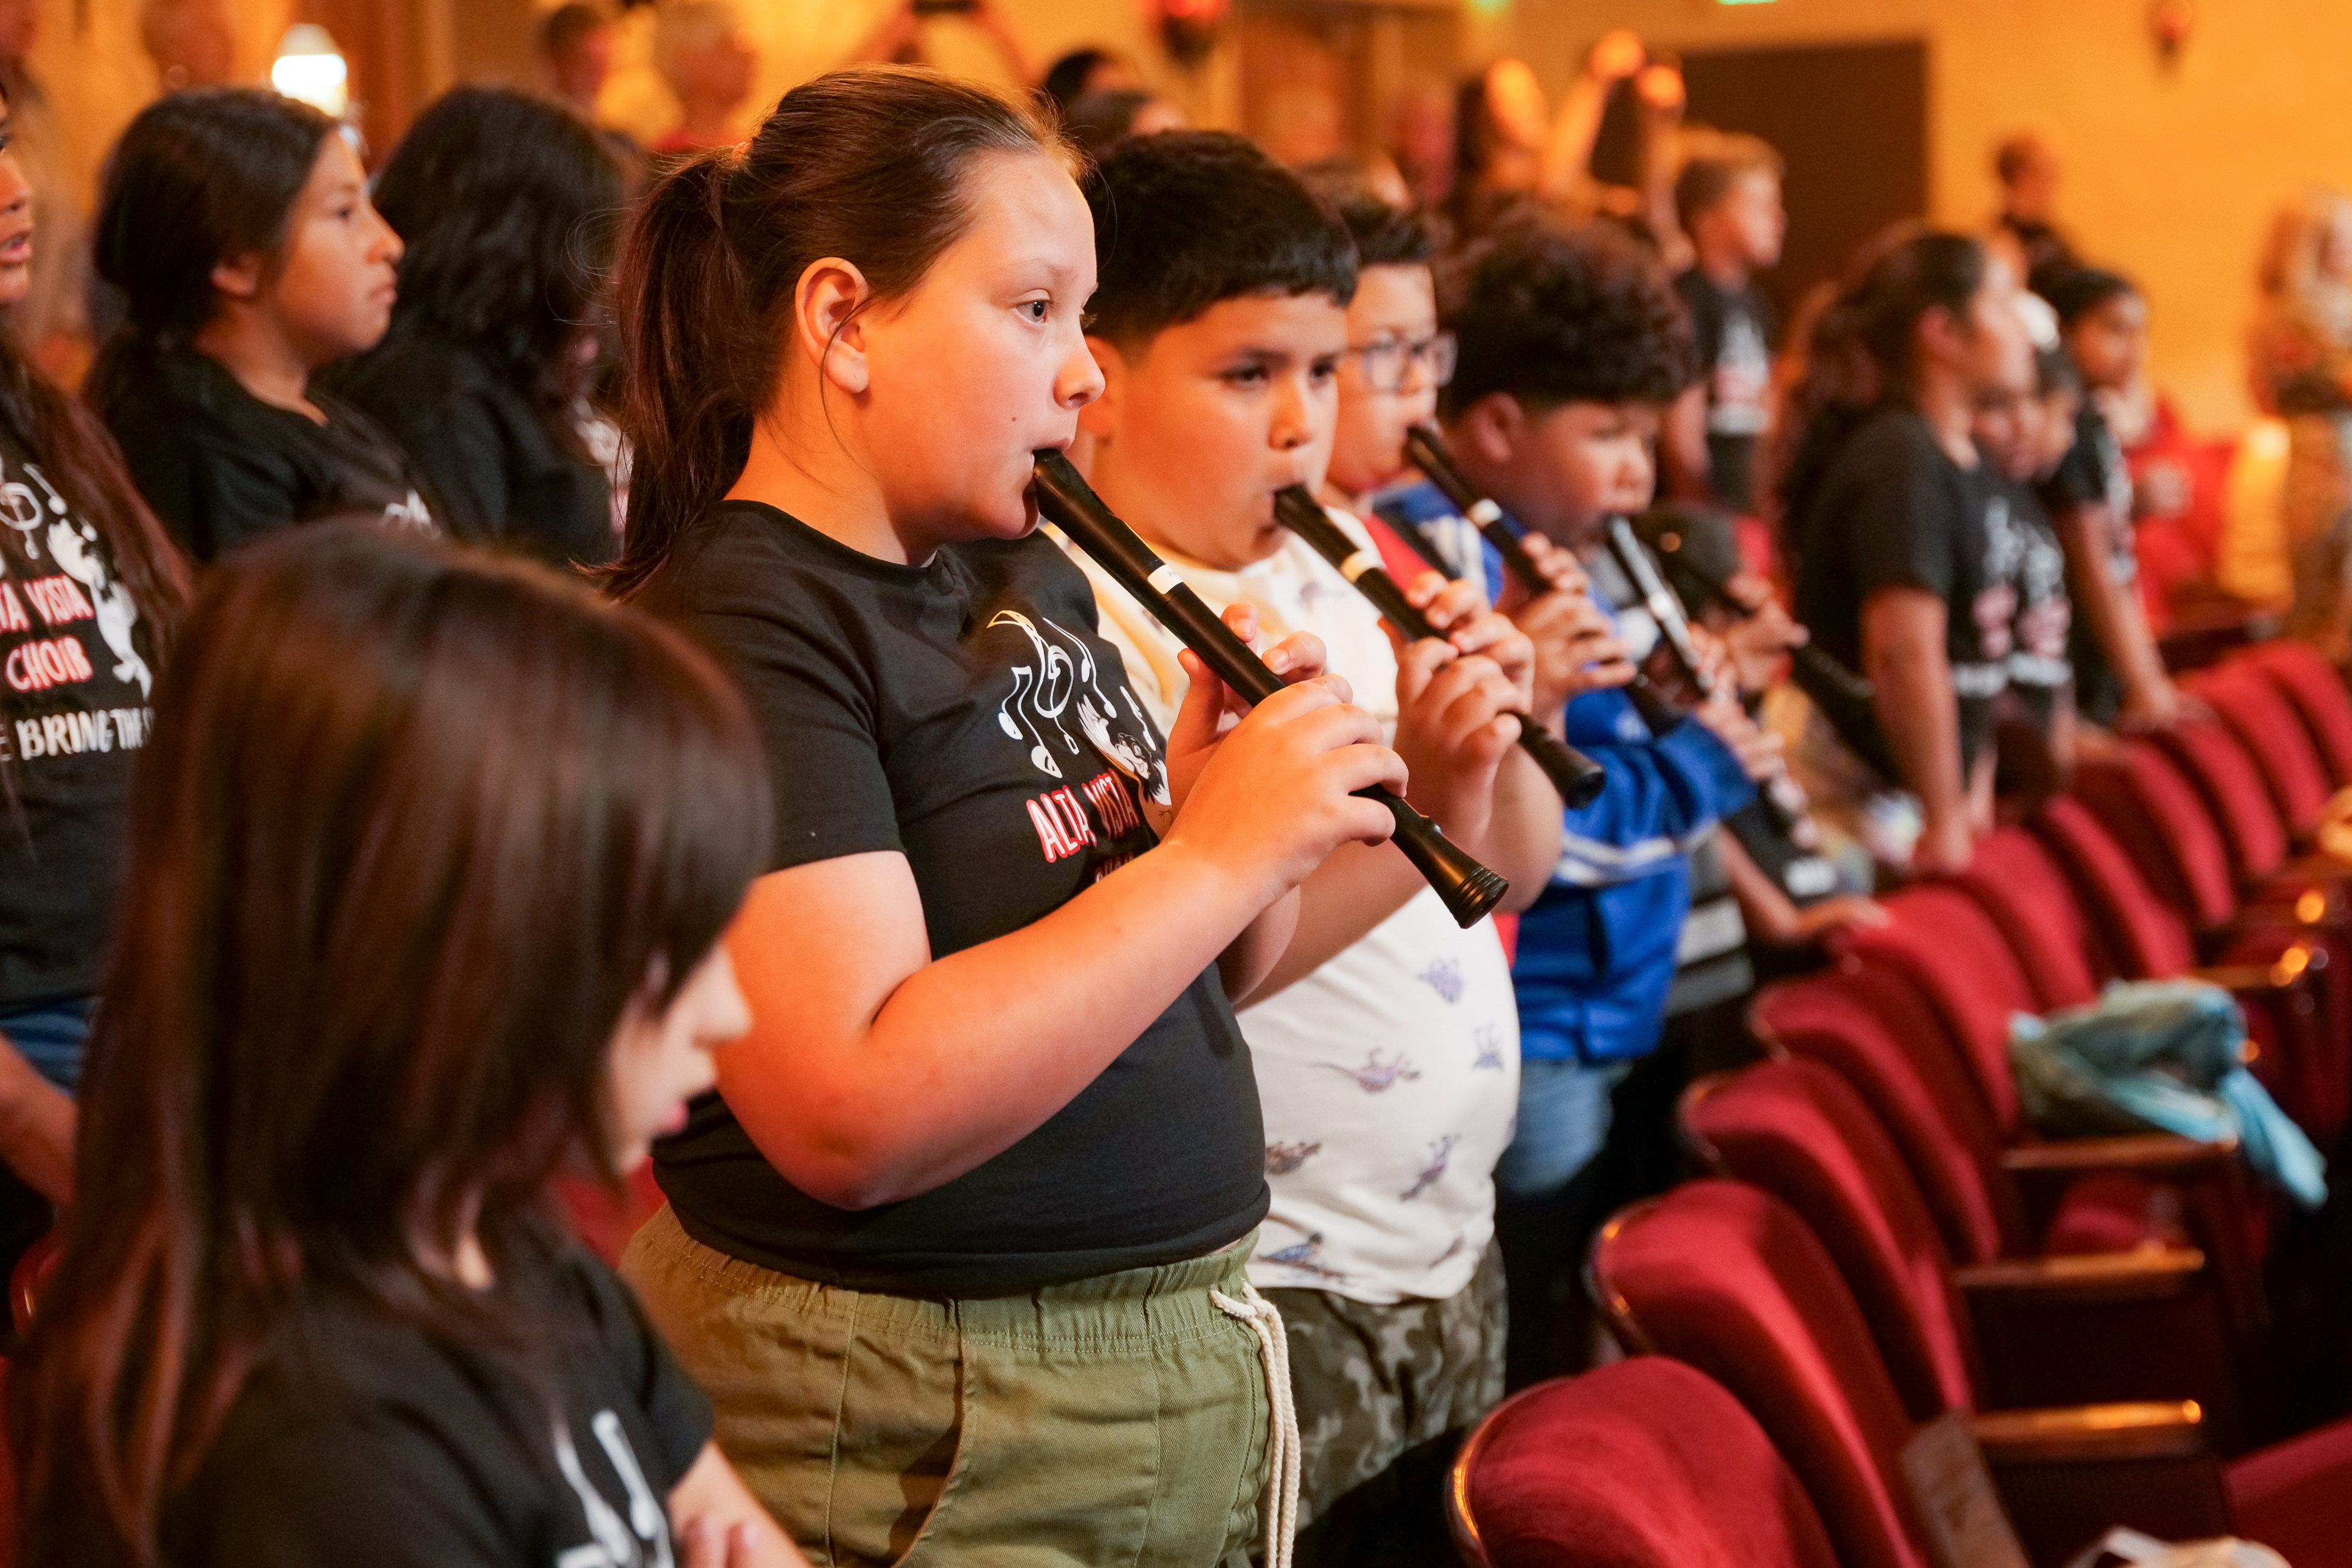 Students playing recorders